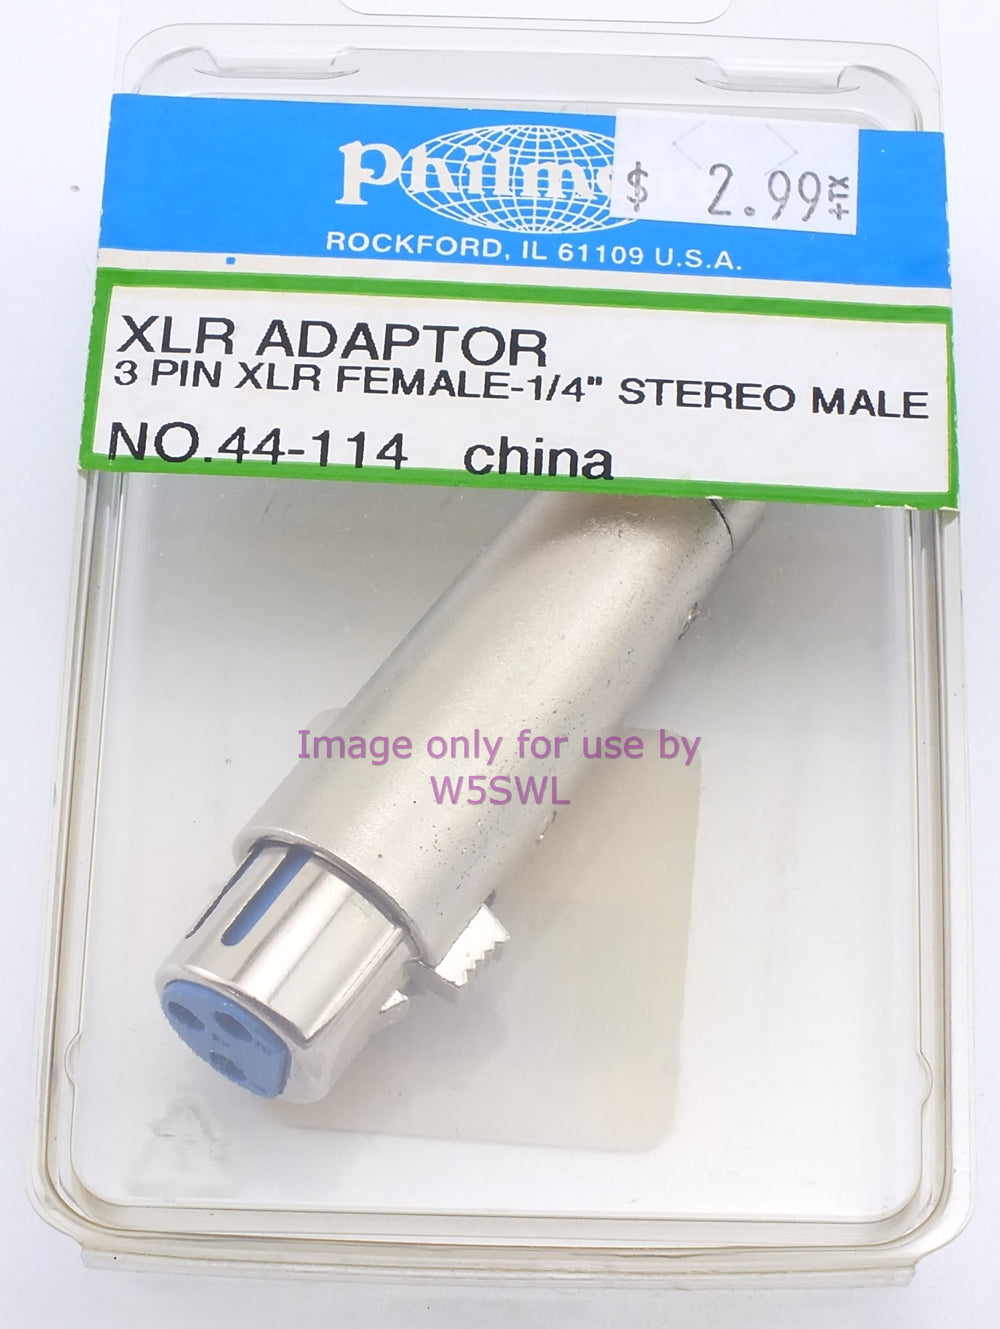 Philmore 44-114 XLR Adapter 3Pin XLR Female to 1/4" Stereo Male (Bin2) - Dave's Hobby Shop by W5SWL